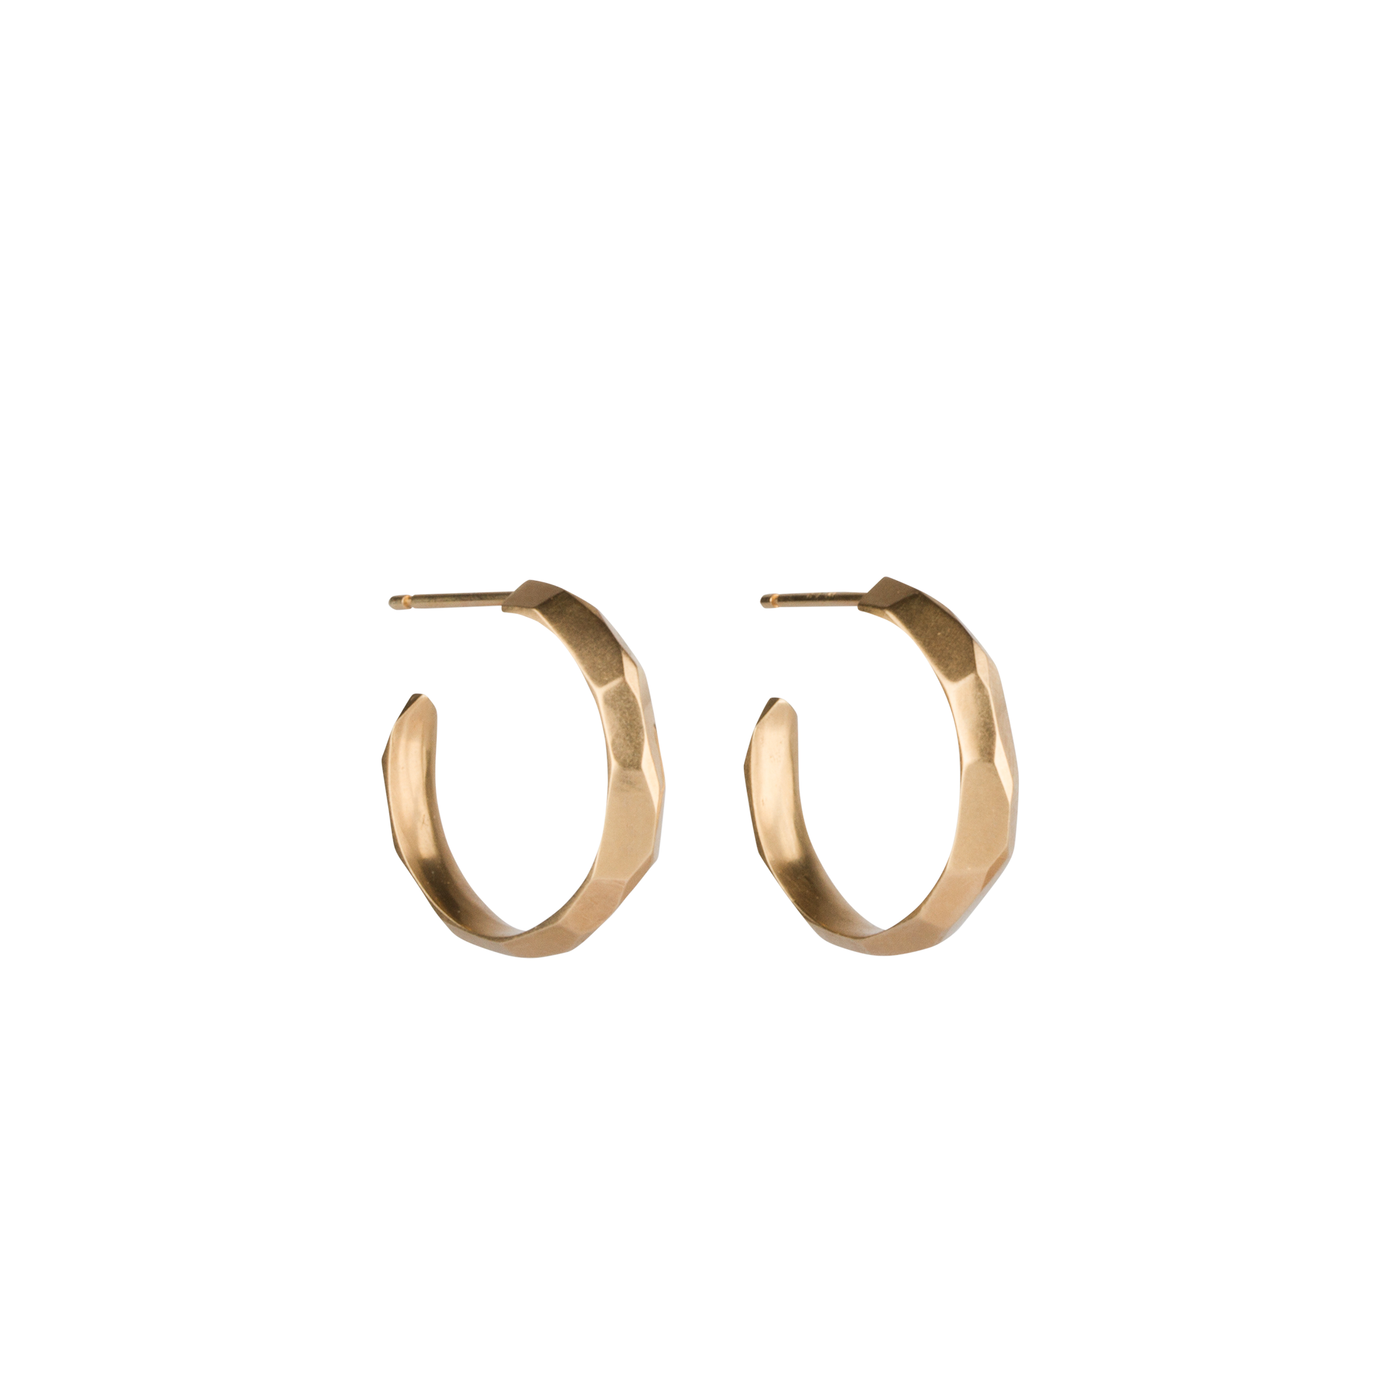 Gold Faceted Denali Hoop Earrings on a white background by Corey Egan